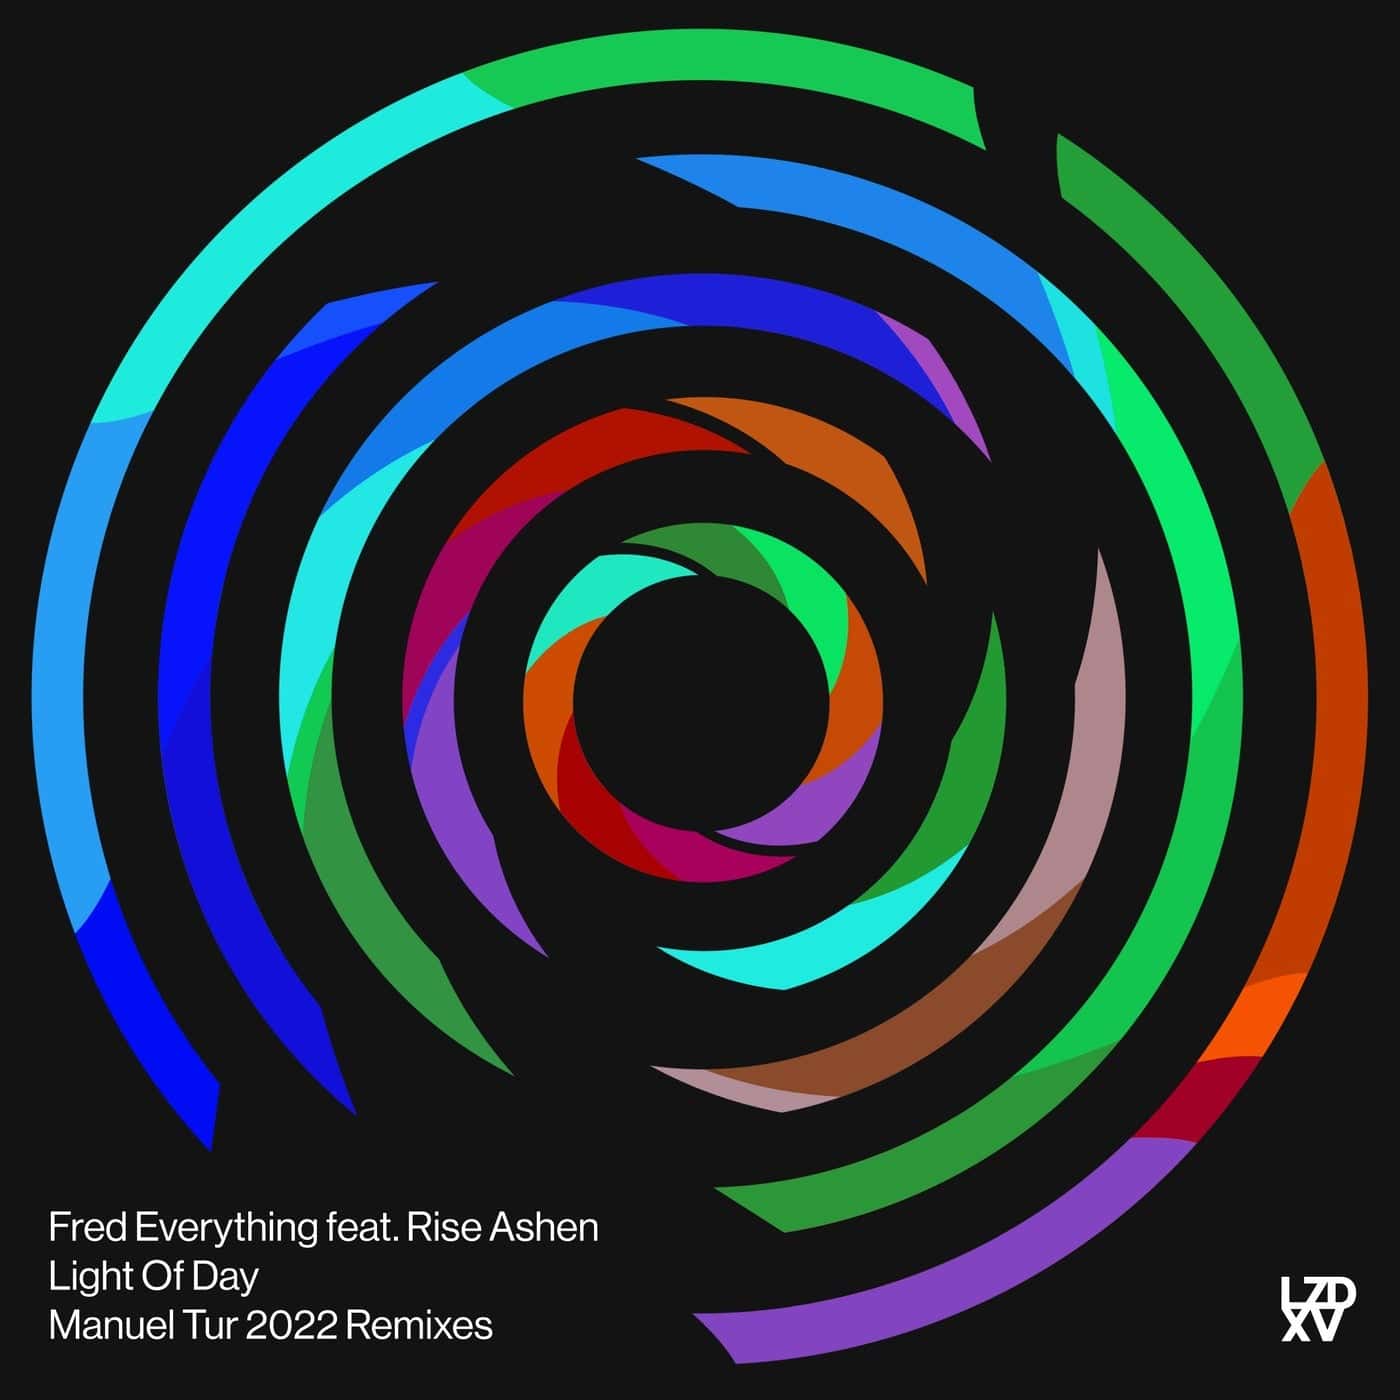 Download Fred Everything, Rise Ashen - Light Of Day (Manuel Tur 2022 Remixes) on Electrobuzz